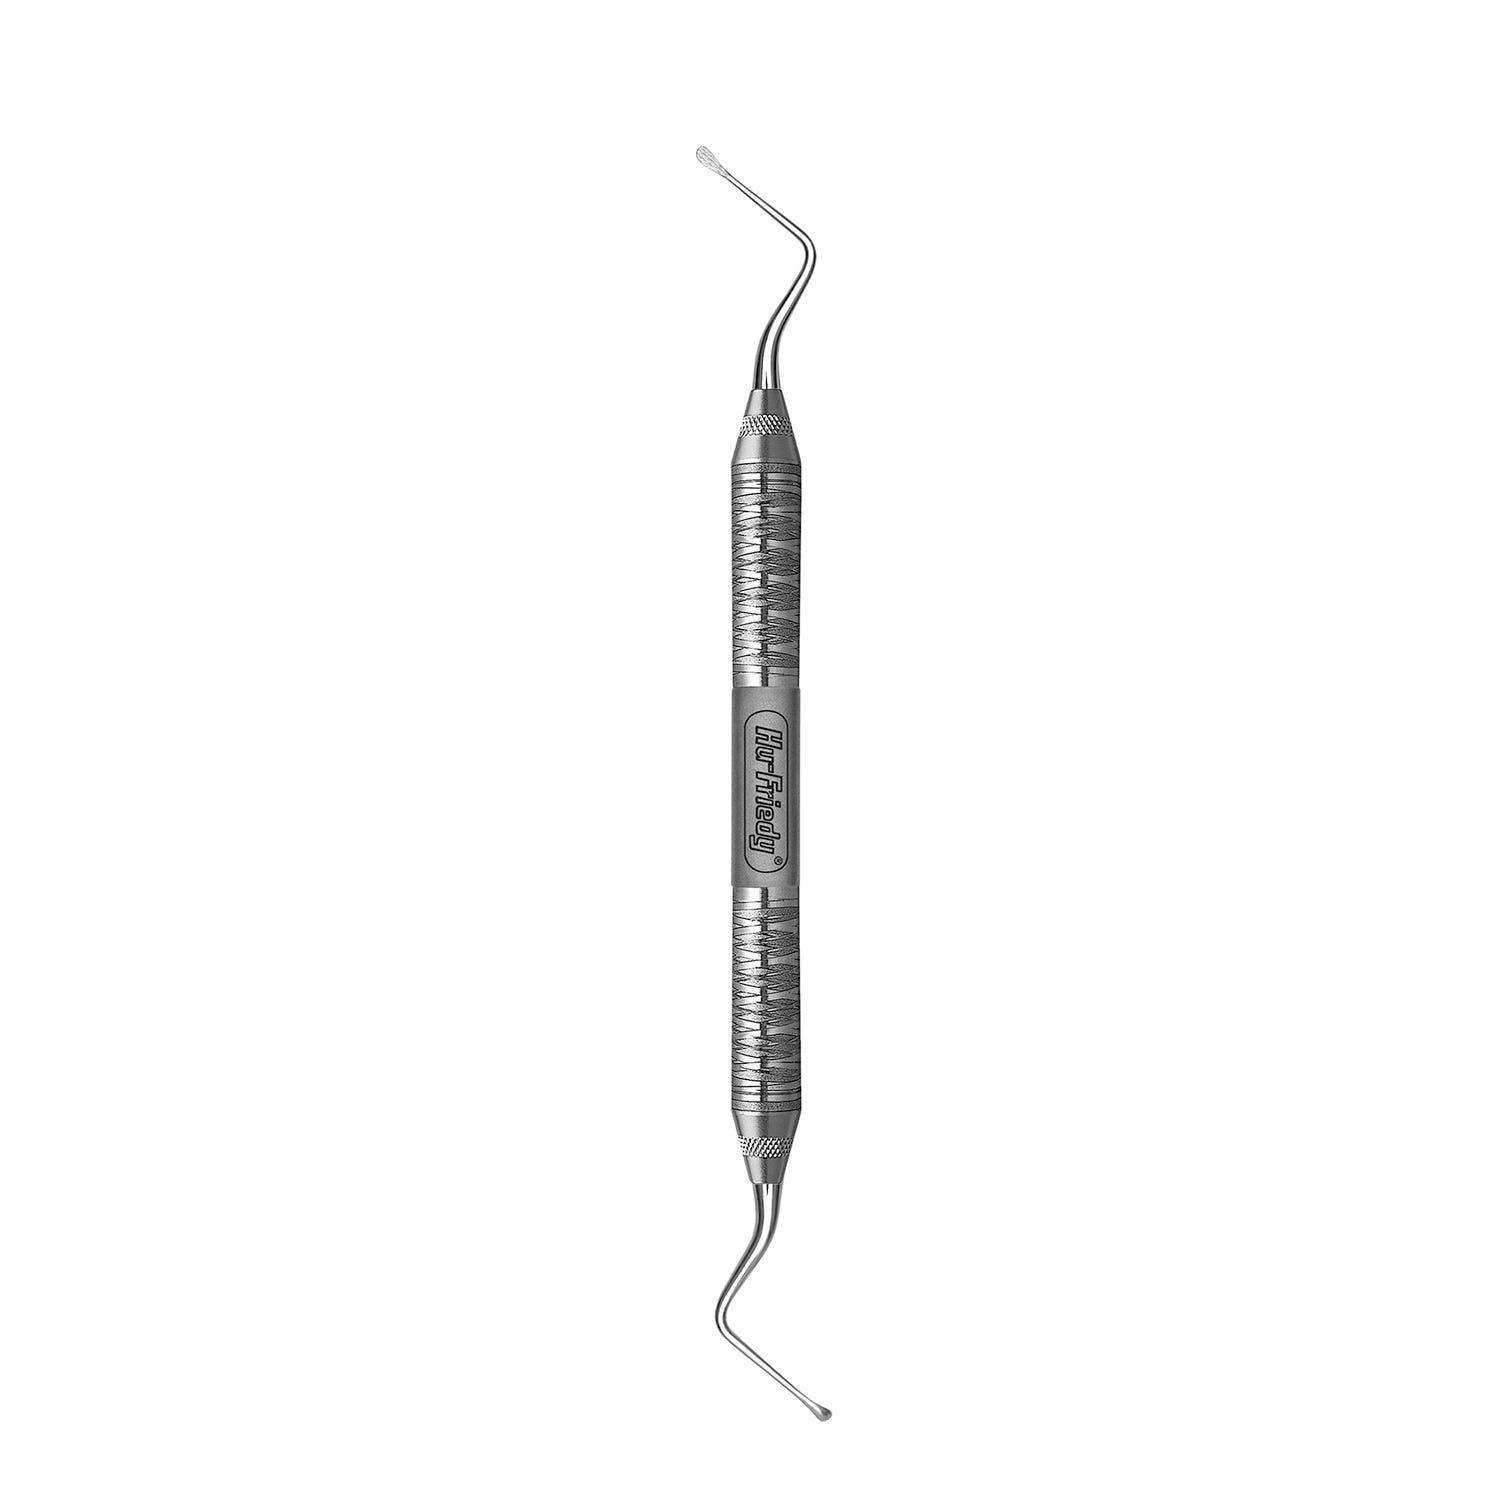 Curette Lucas #84 With #6 Satin Steel Handle Double Ended